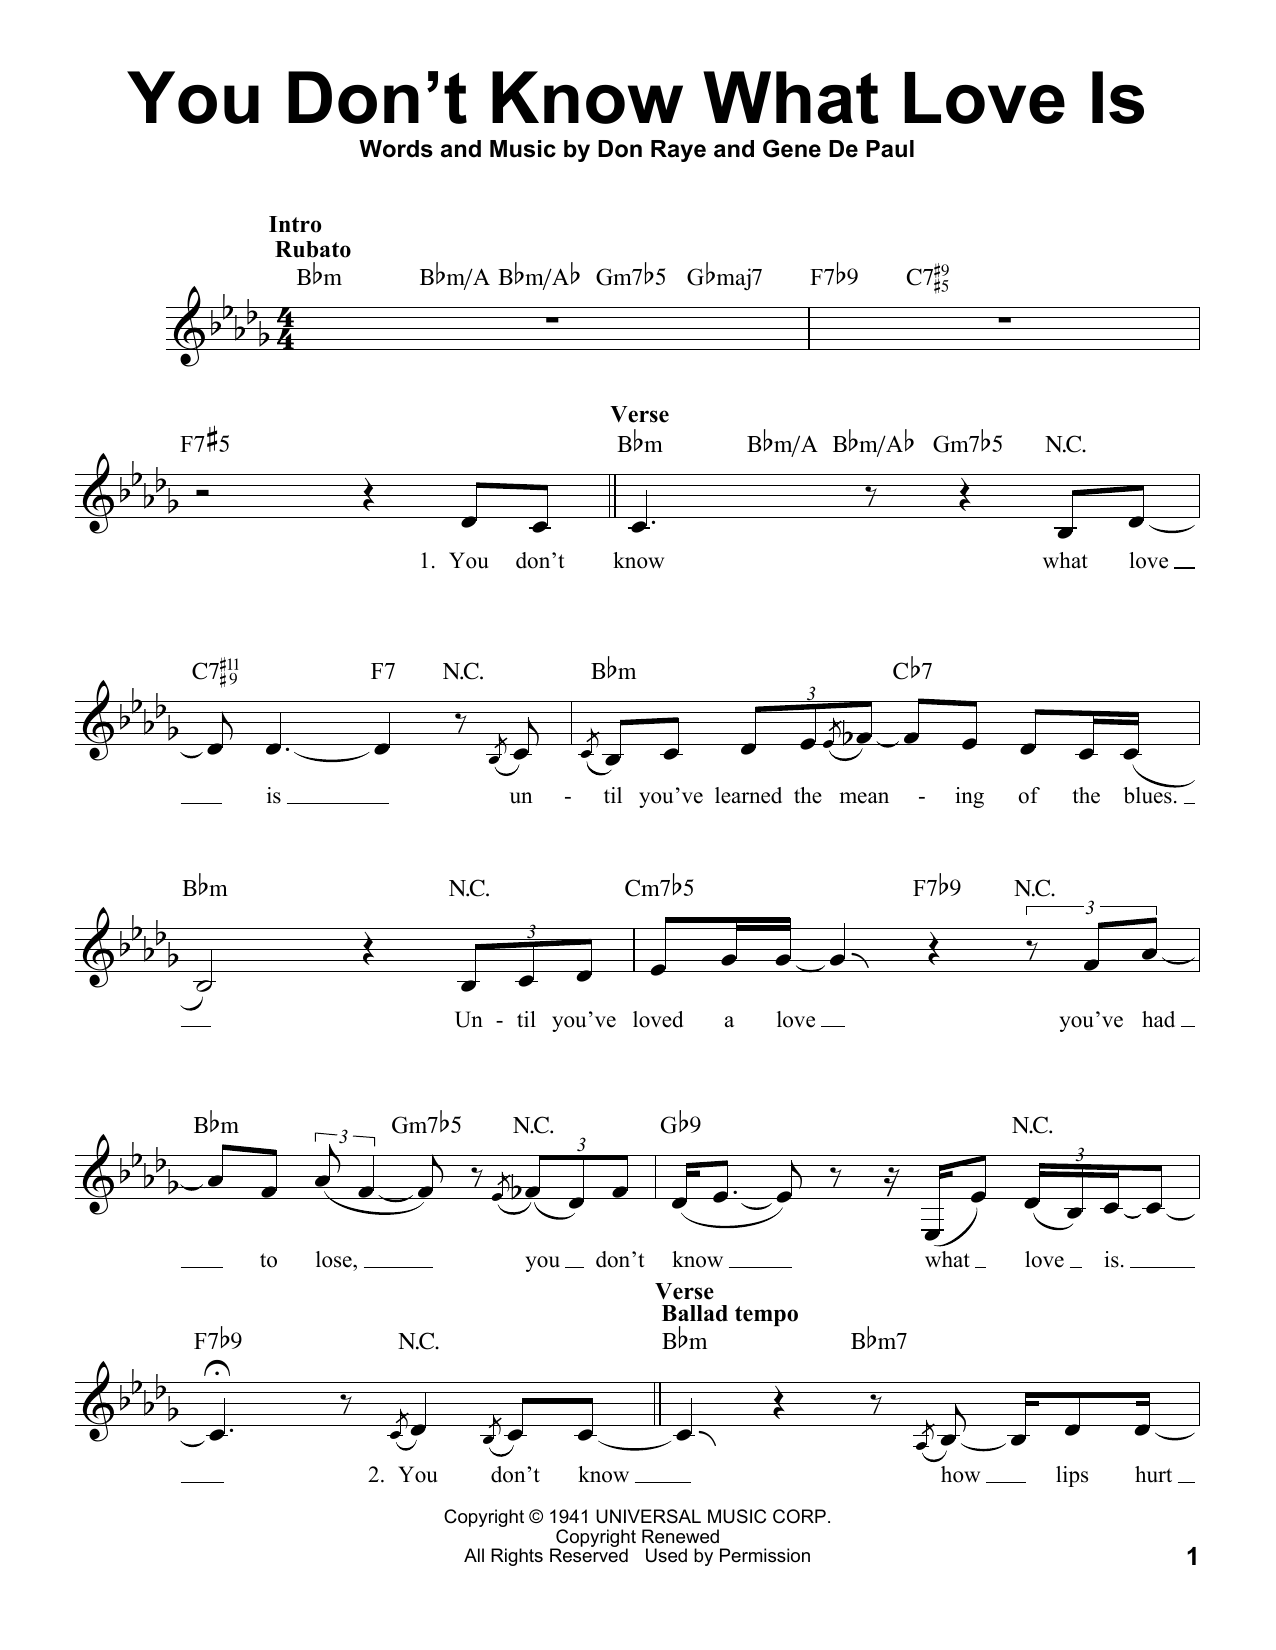 Gene De Paul You Don't Know What Love Is sheet music notes and chords. Download Printable PDF.